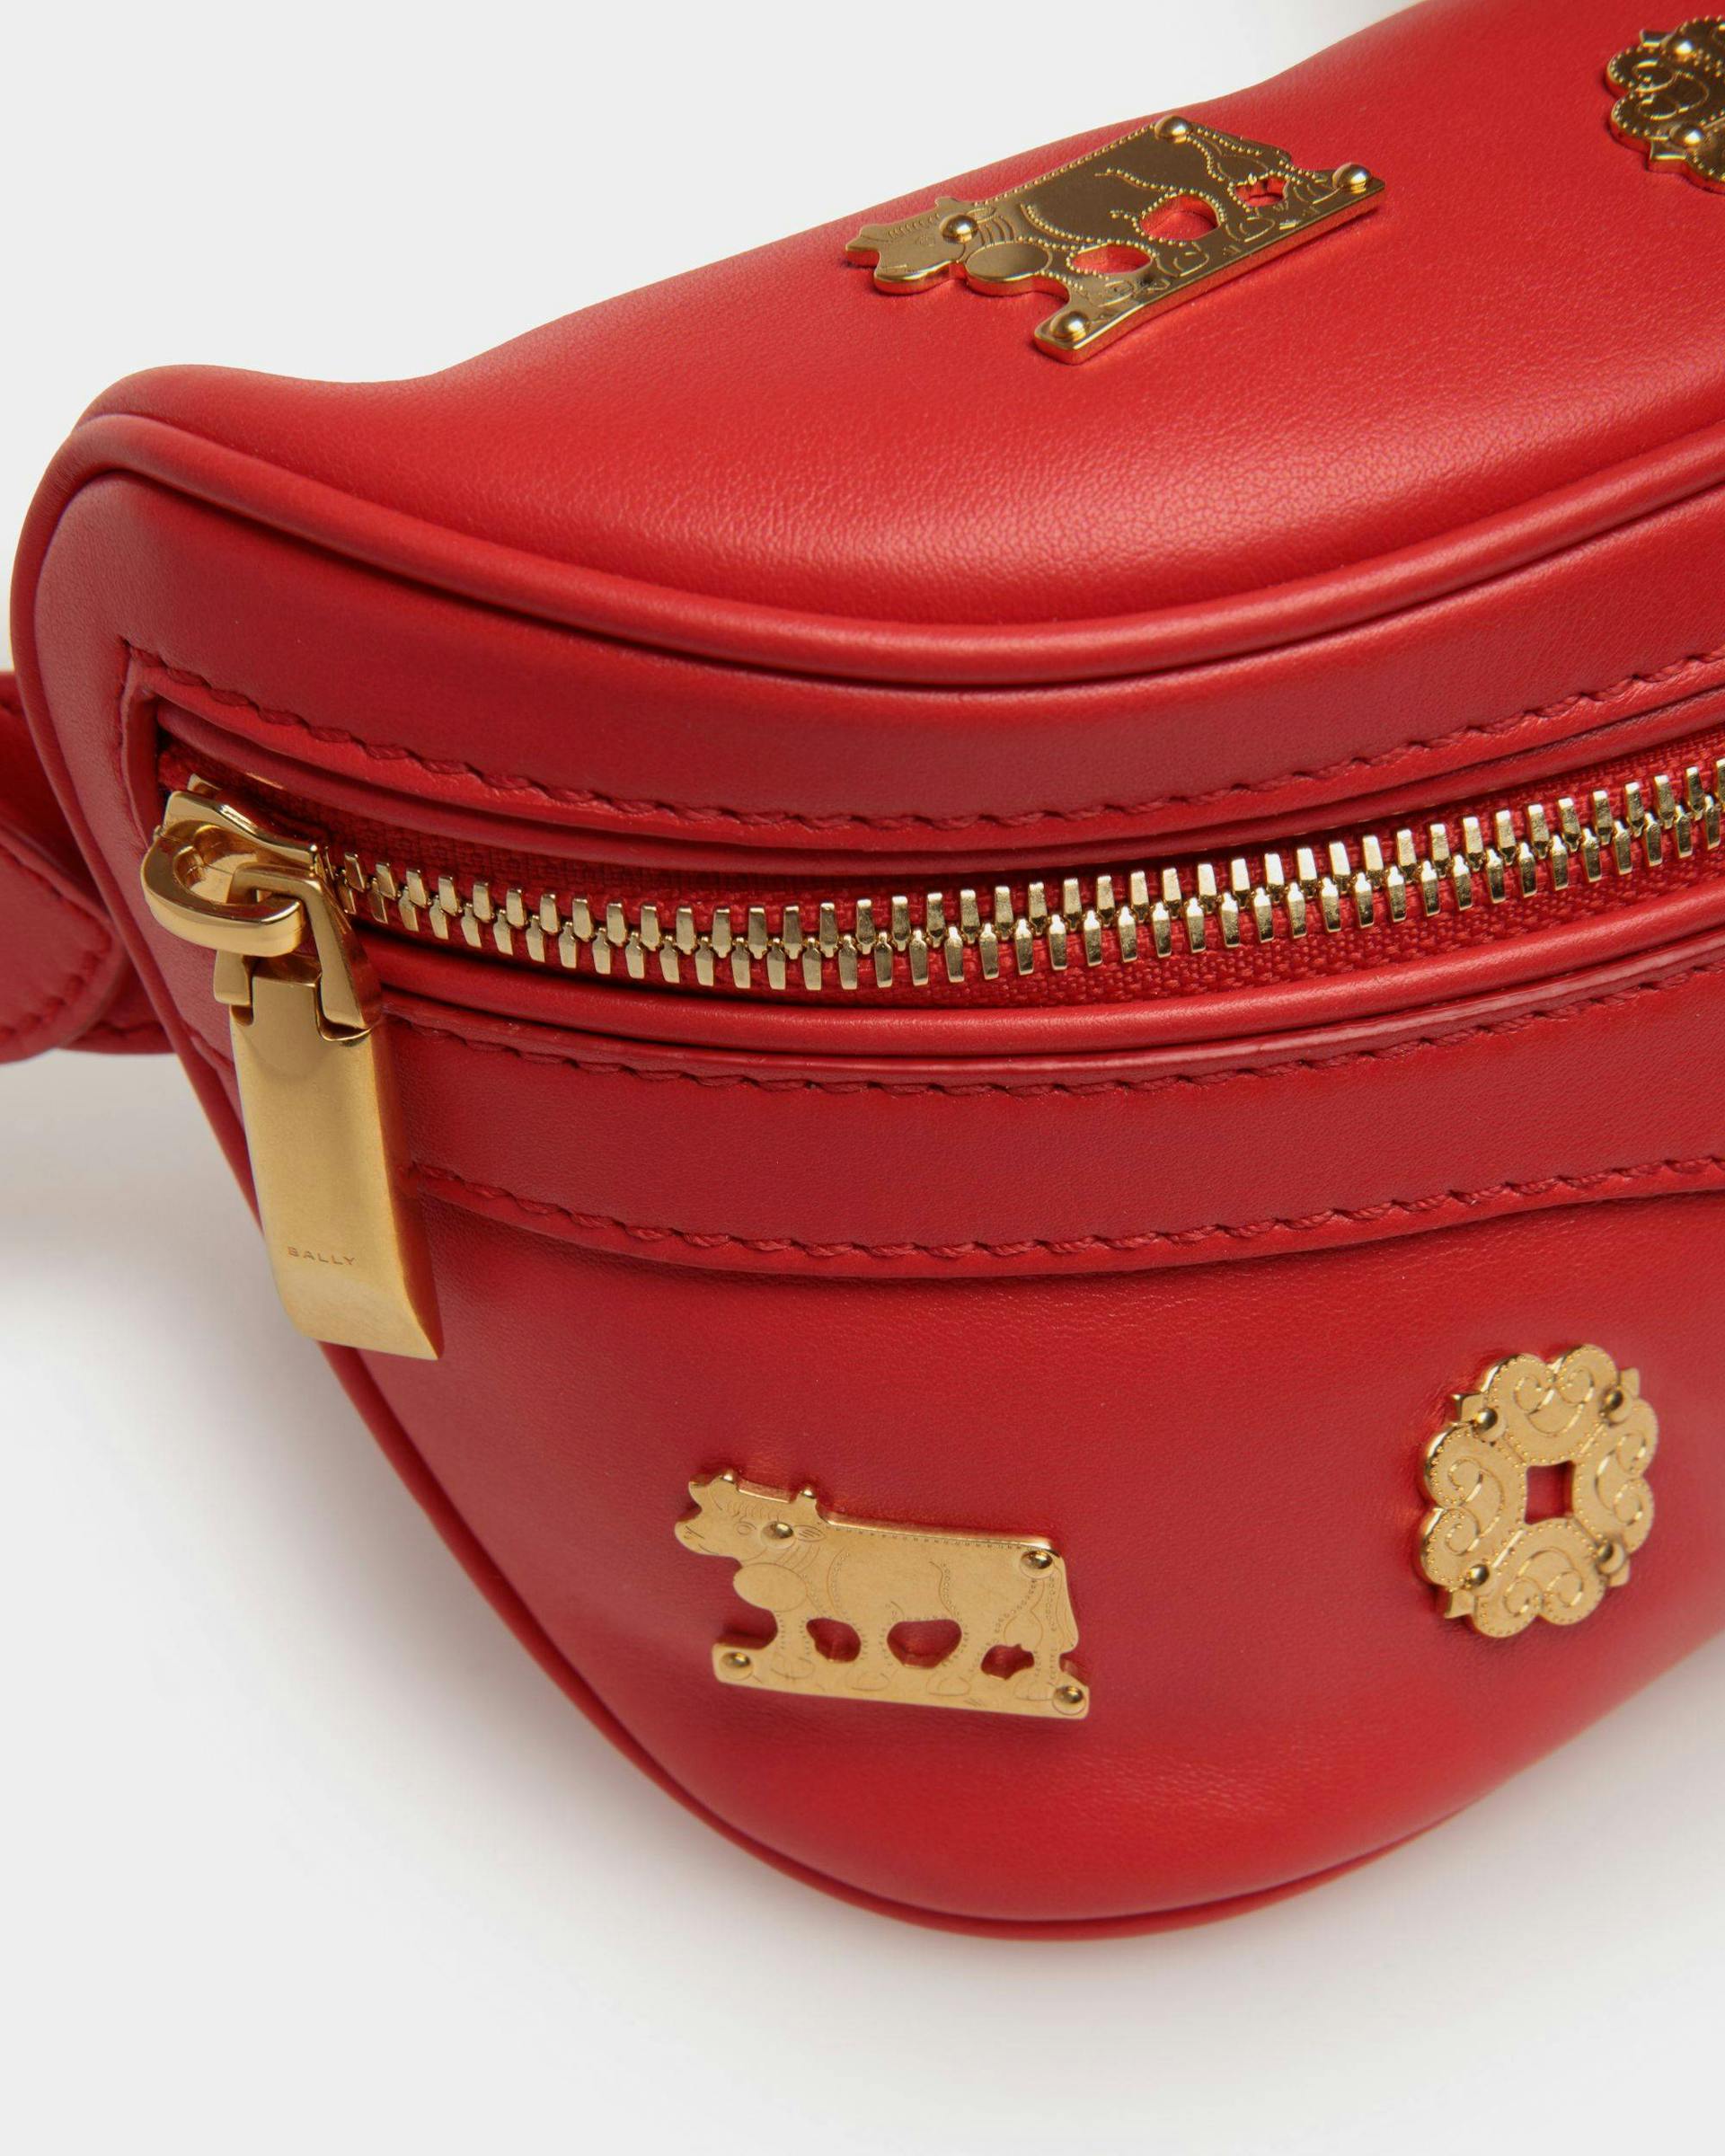 Women's Moutain Belt Bag  in Red Leather | Bally | Still Life Detail